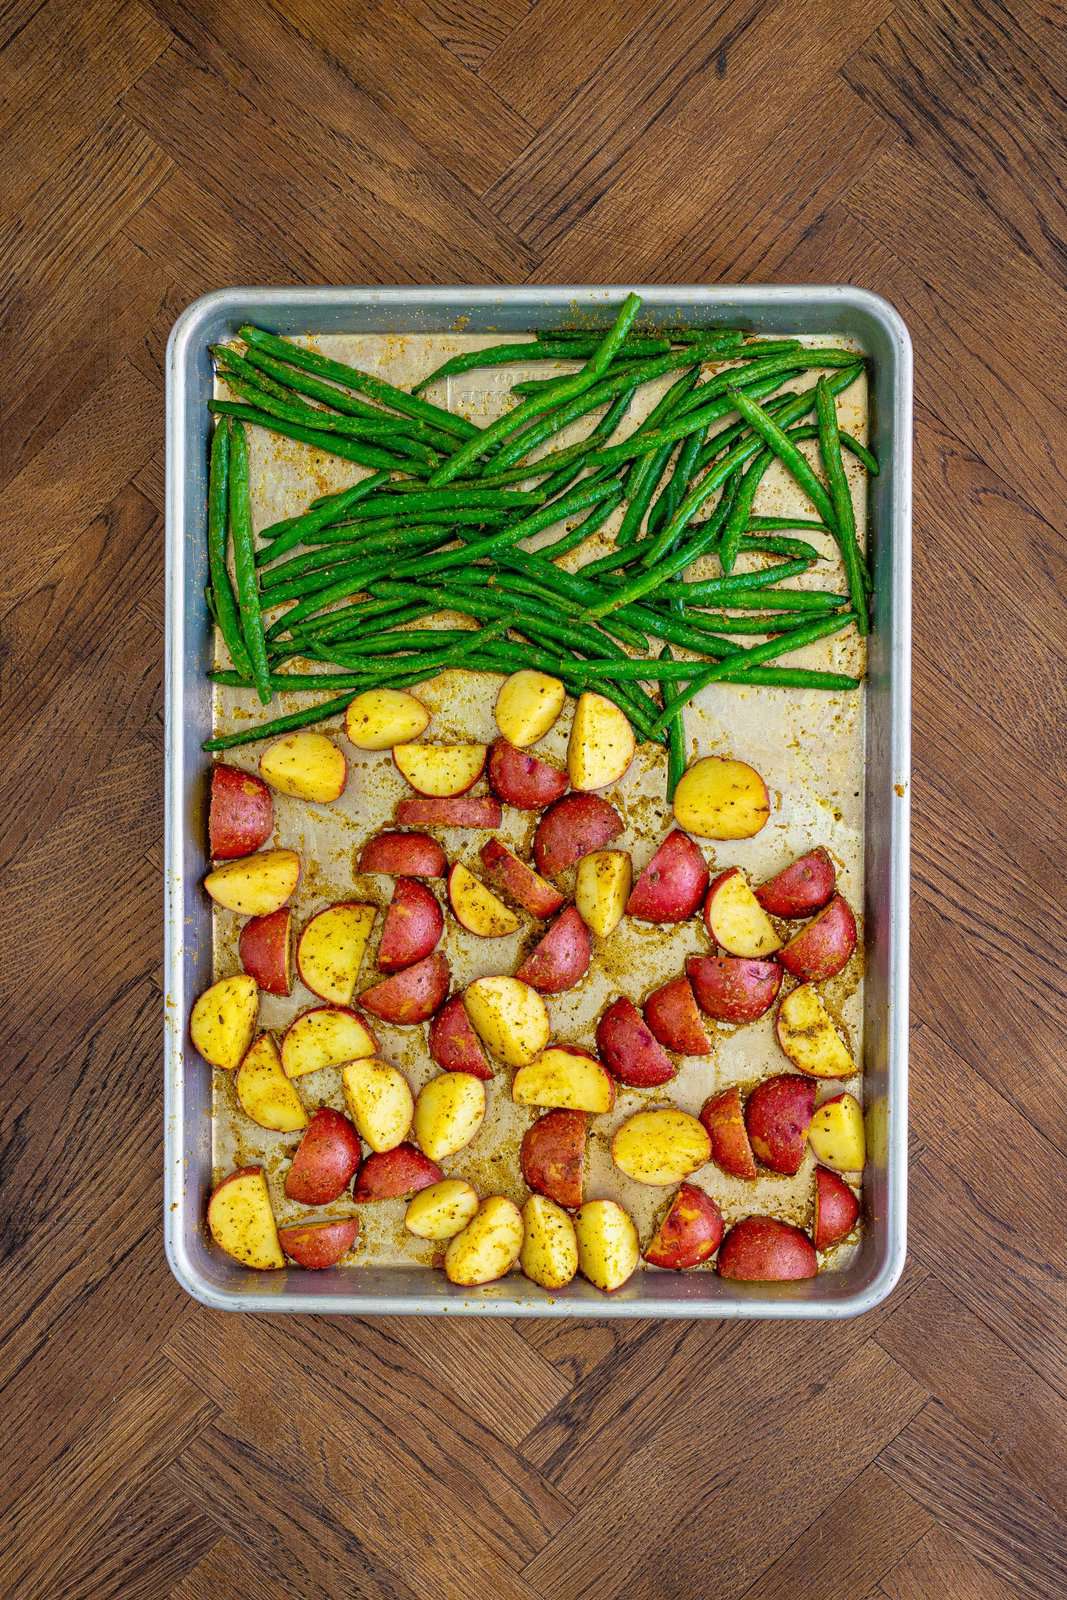 Baked green beans and potatoes out of the oven on sheet pan.